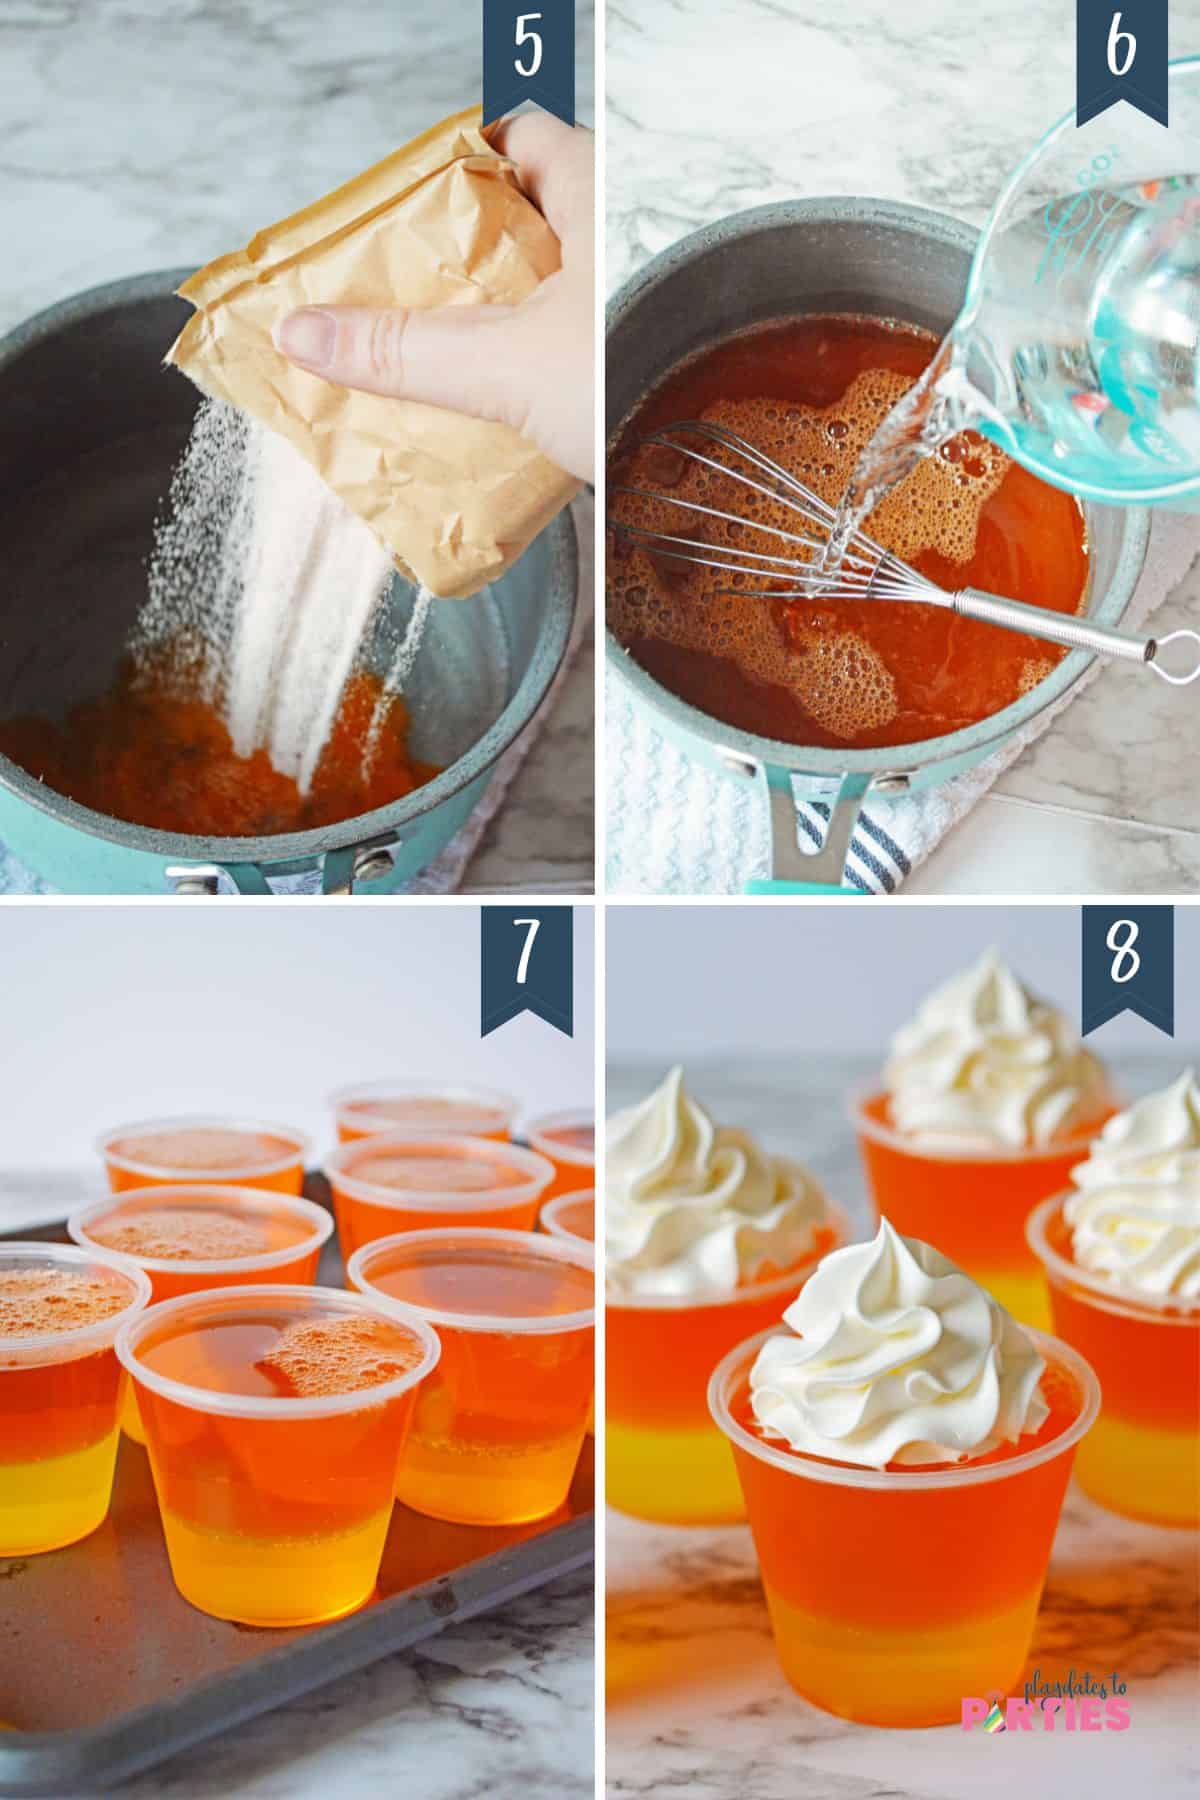 How to Make Candy Corn Jello Cups Steps 5-8.